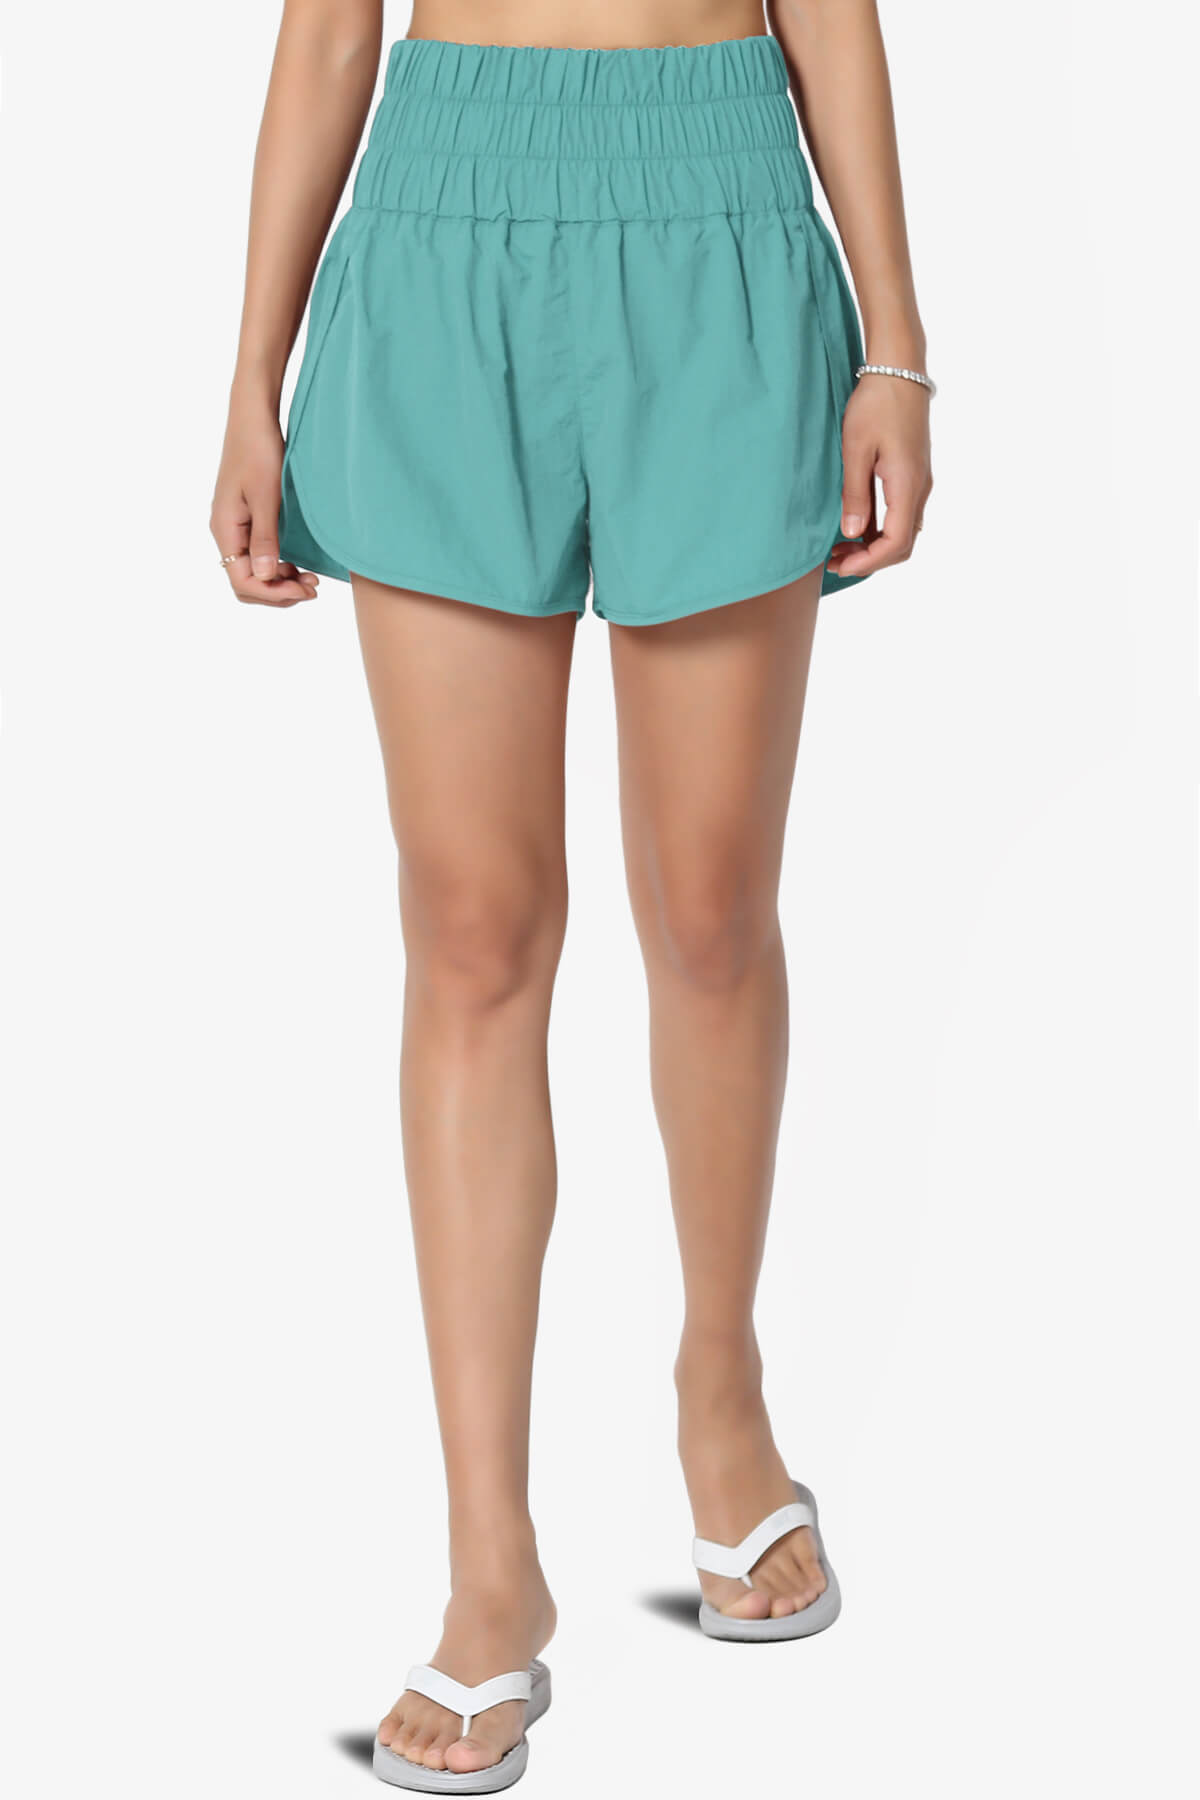 Load image into Gallery viewer, The Way Home Running Shorts DUSTY TEAL_1
